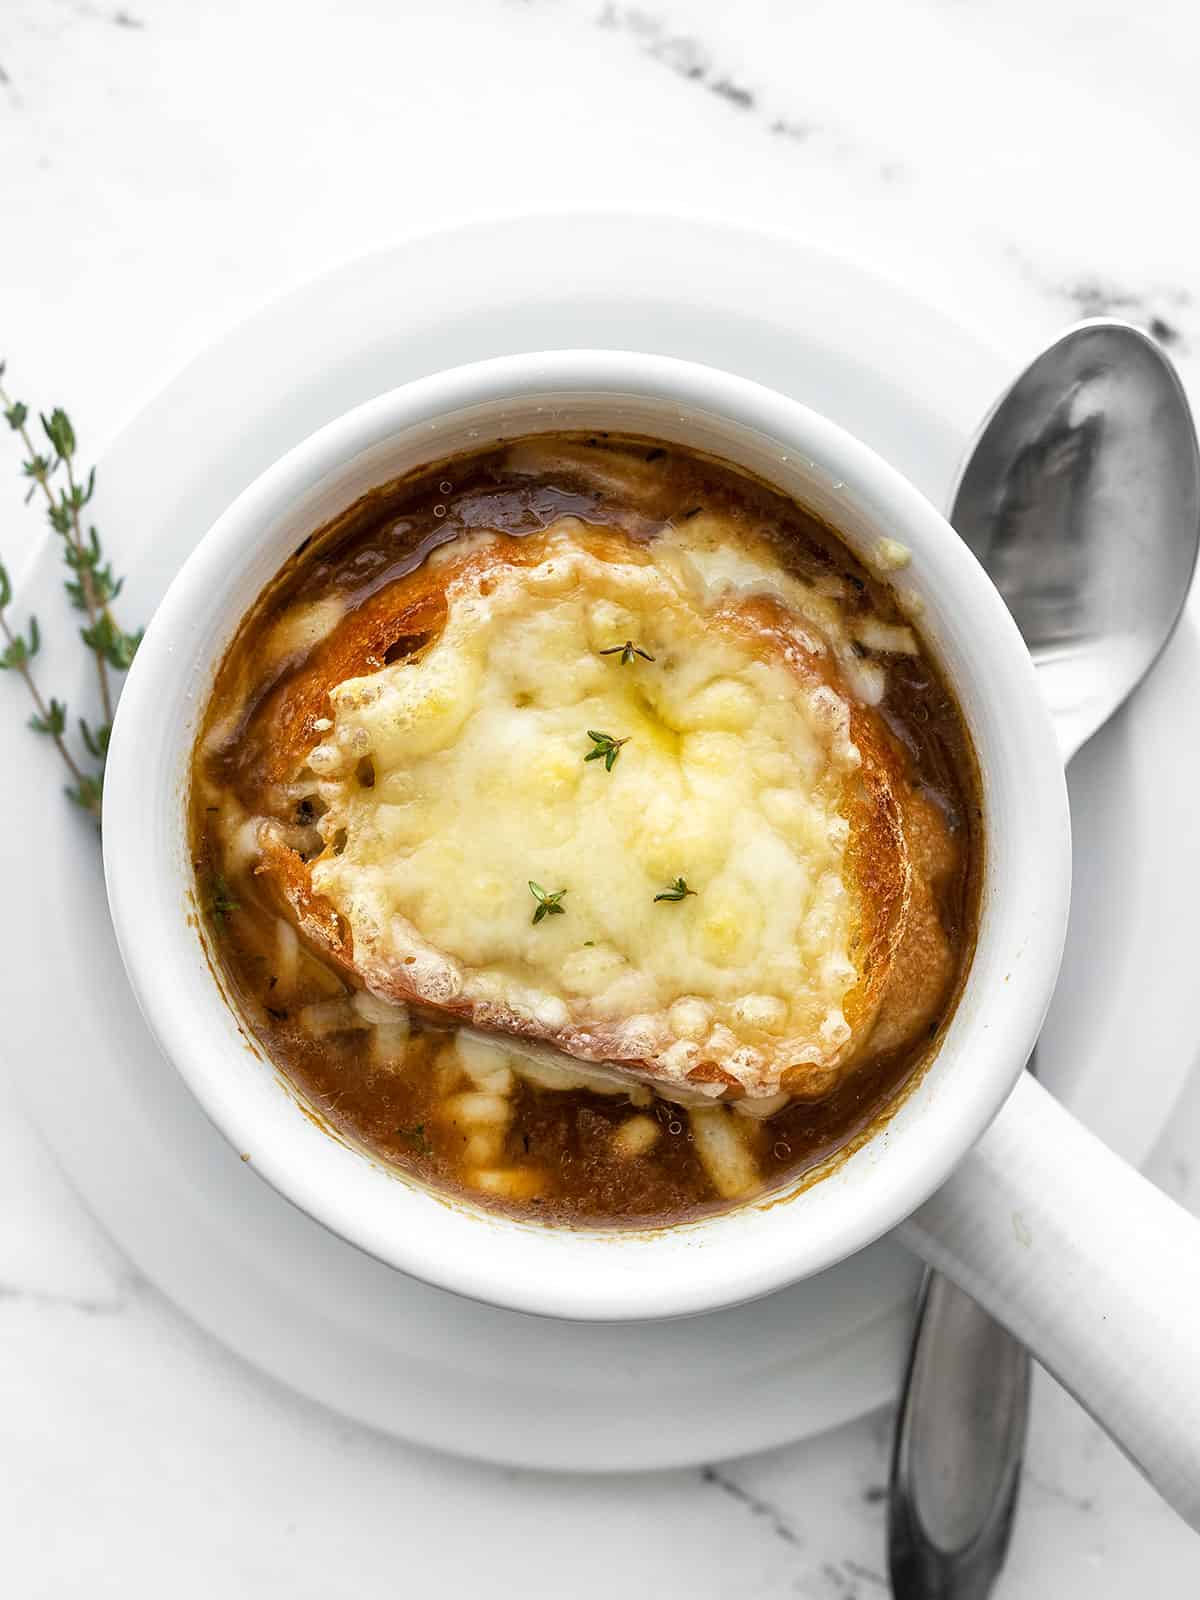 One bowl of french onion soup garnished with fresh thyme, spoon on the side